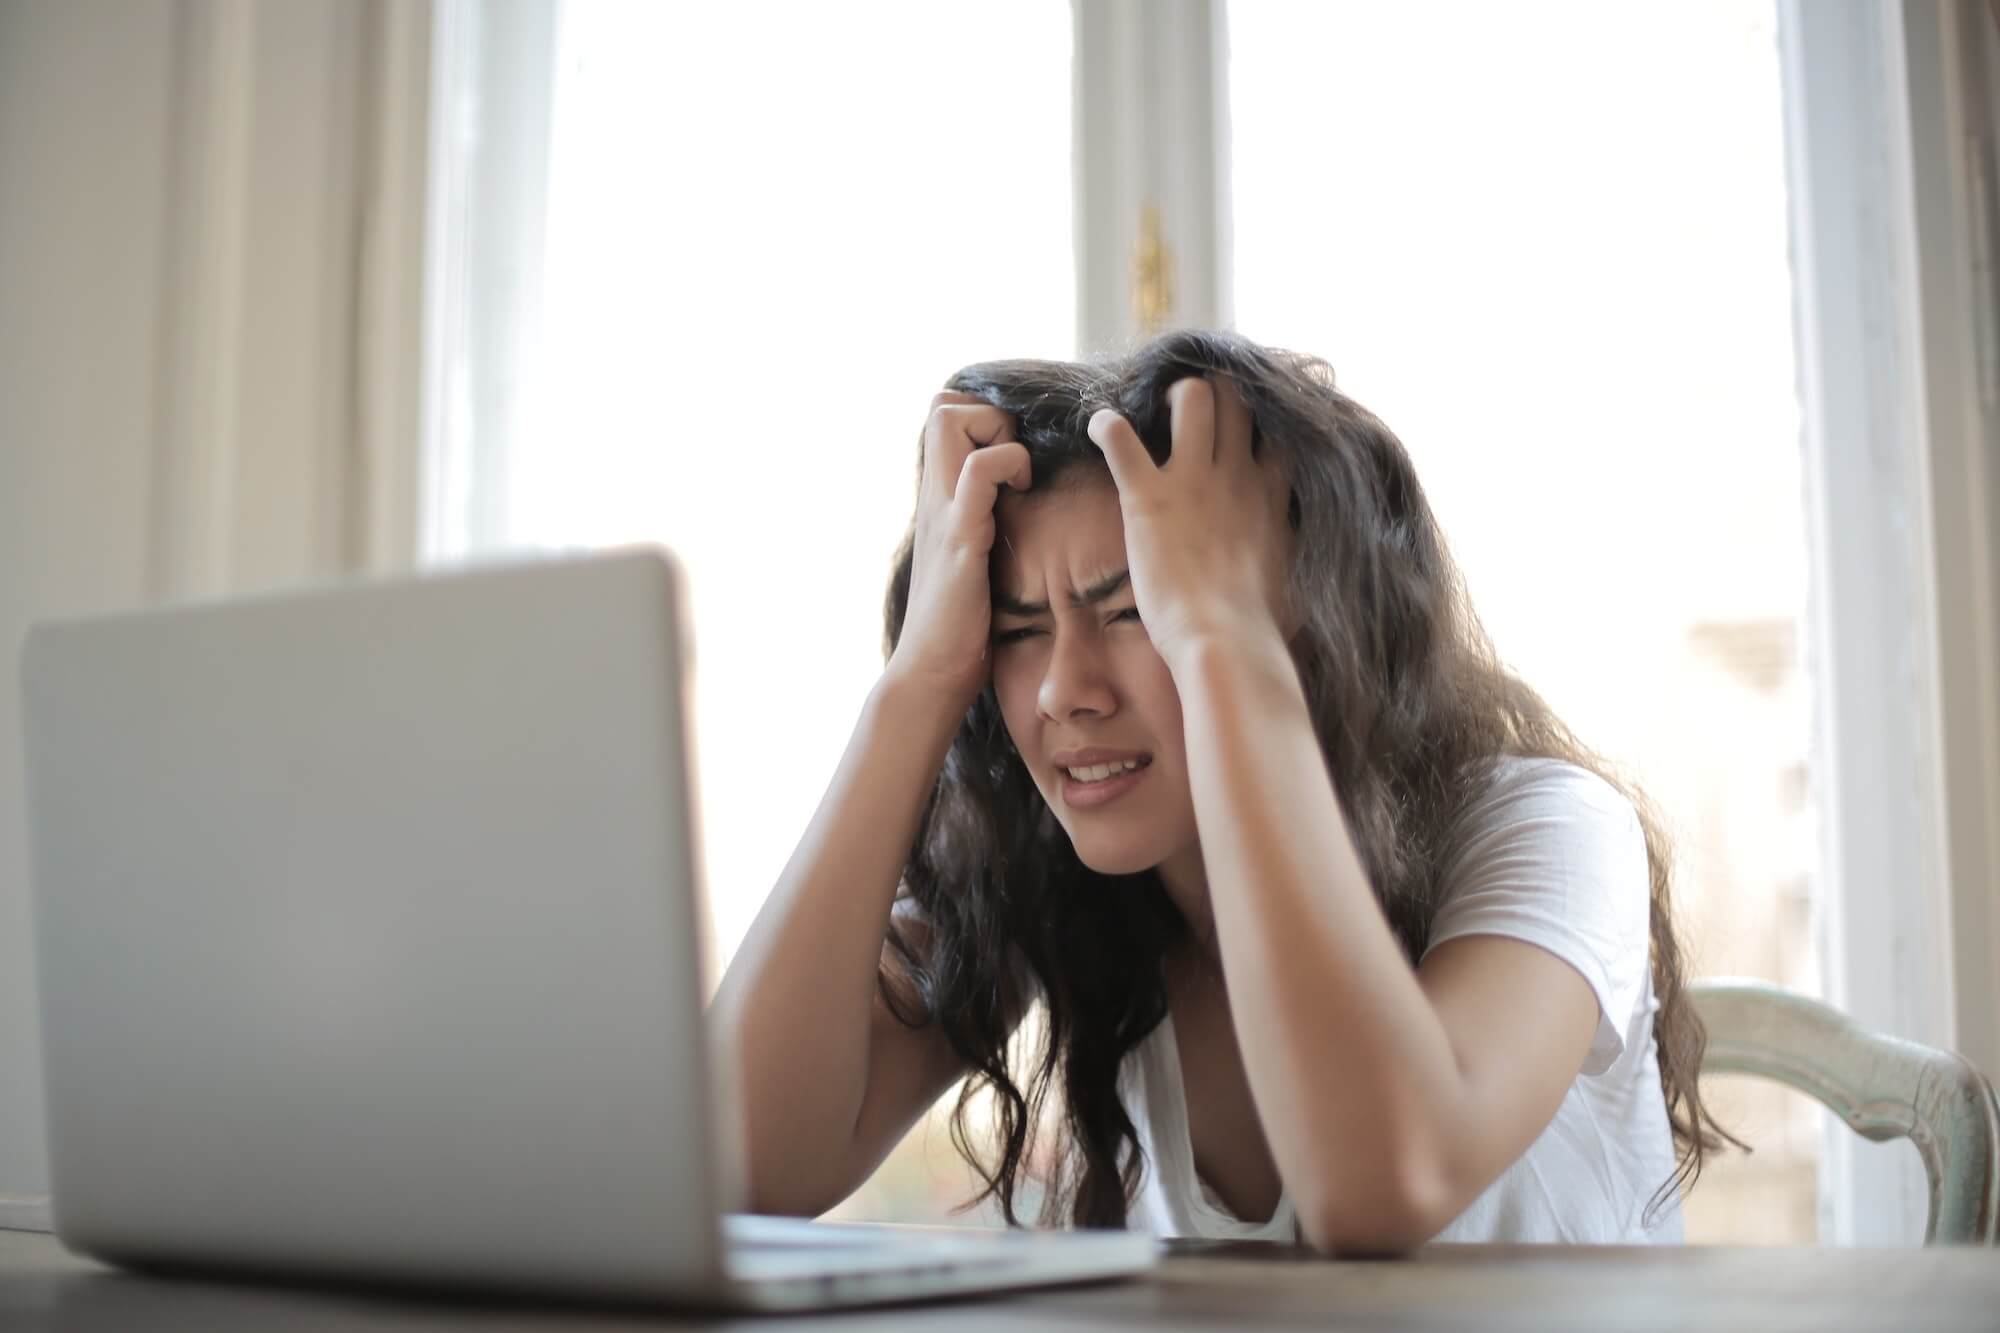 Frustrated woman at a desk clutching her head and leaning over a laptop.